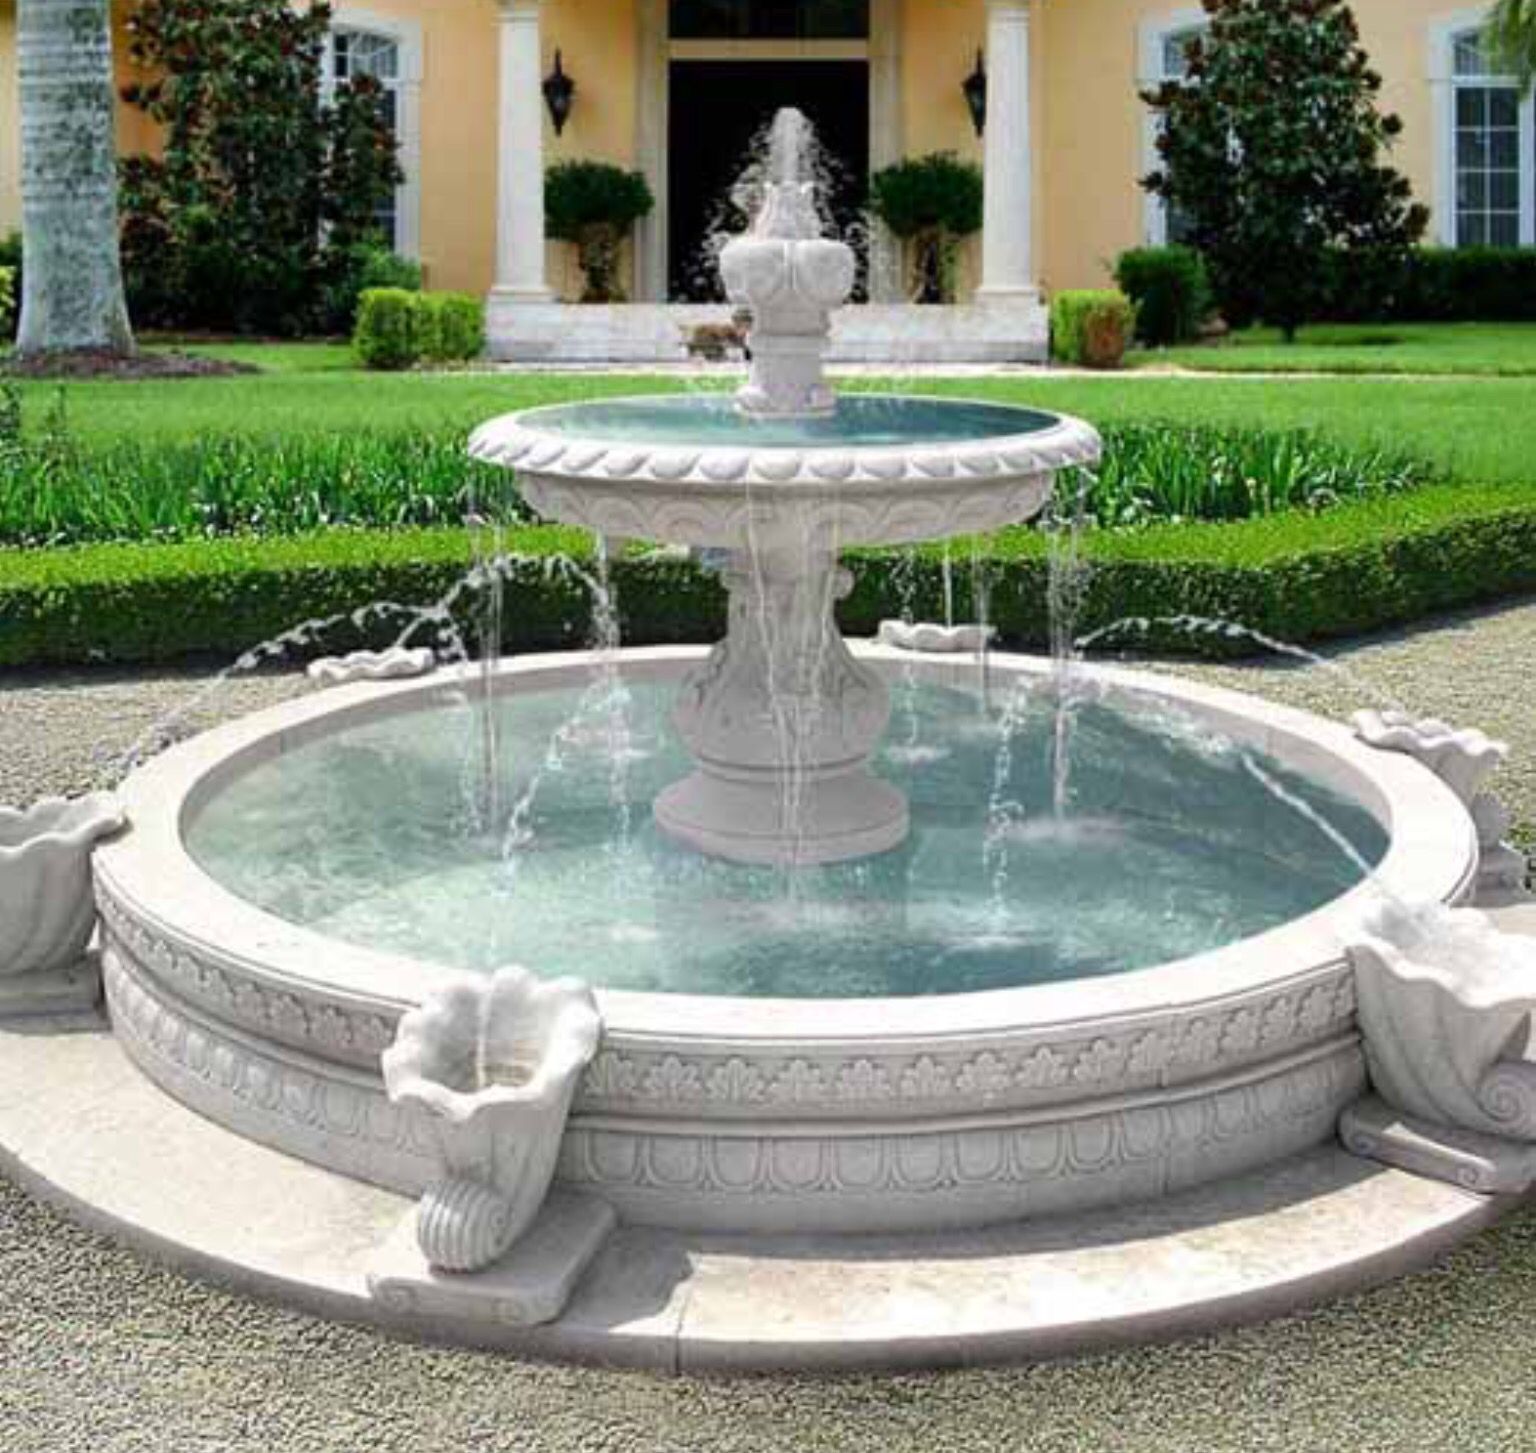 Circle fountain in driveway. | Second Dream House | Pinterest ...